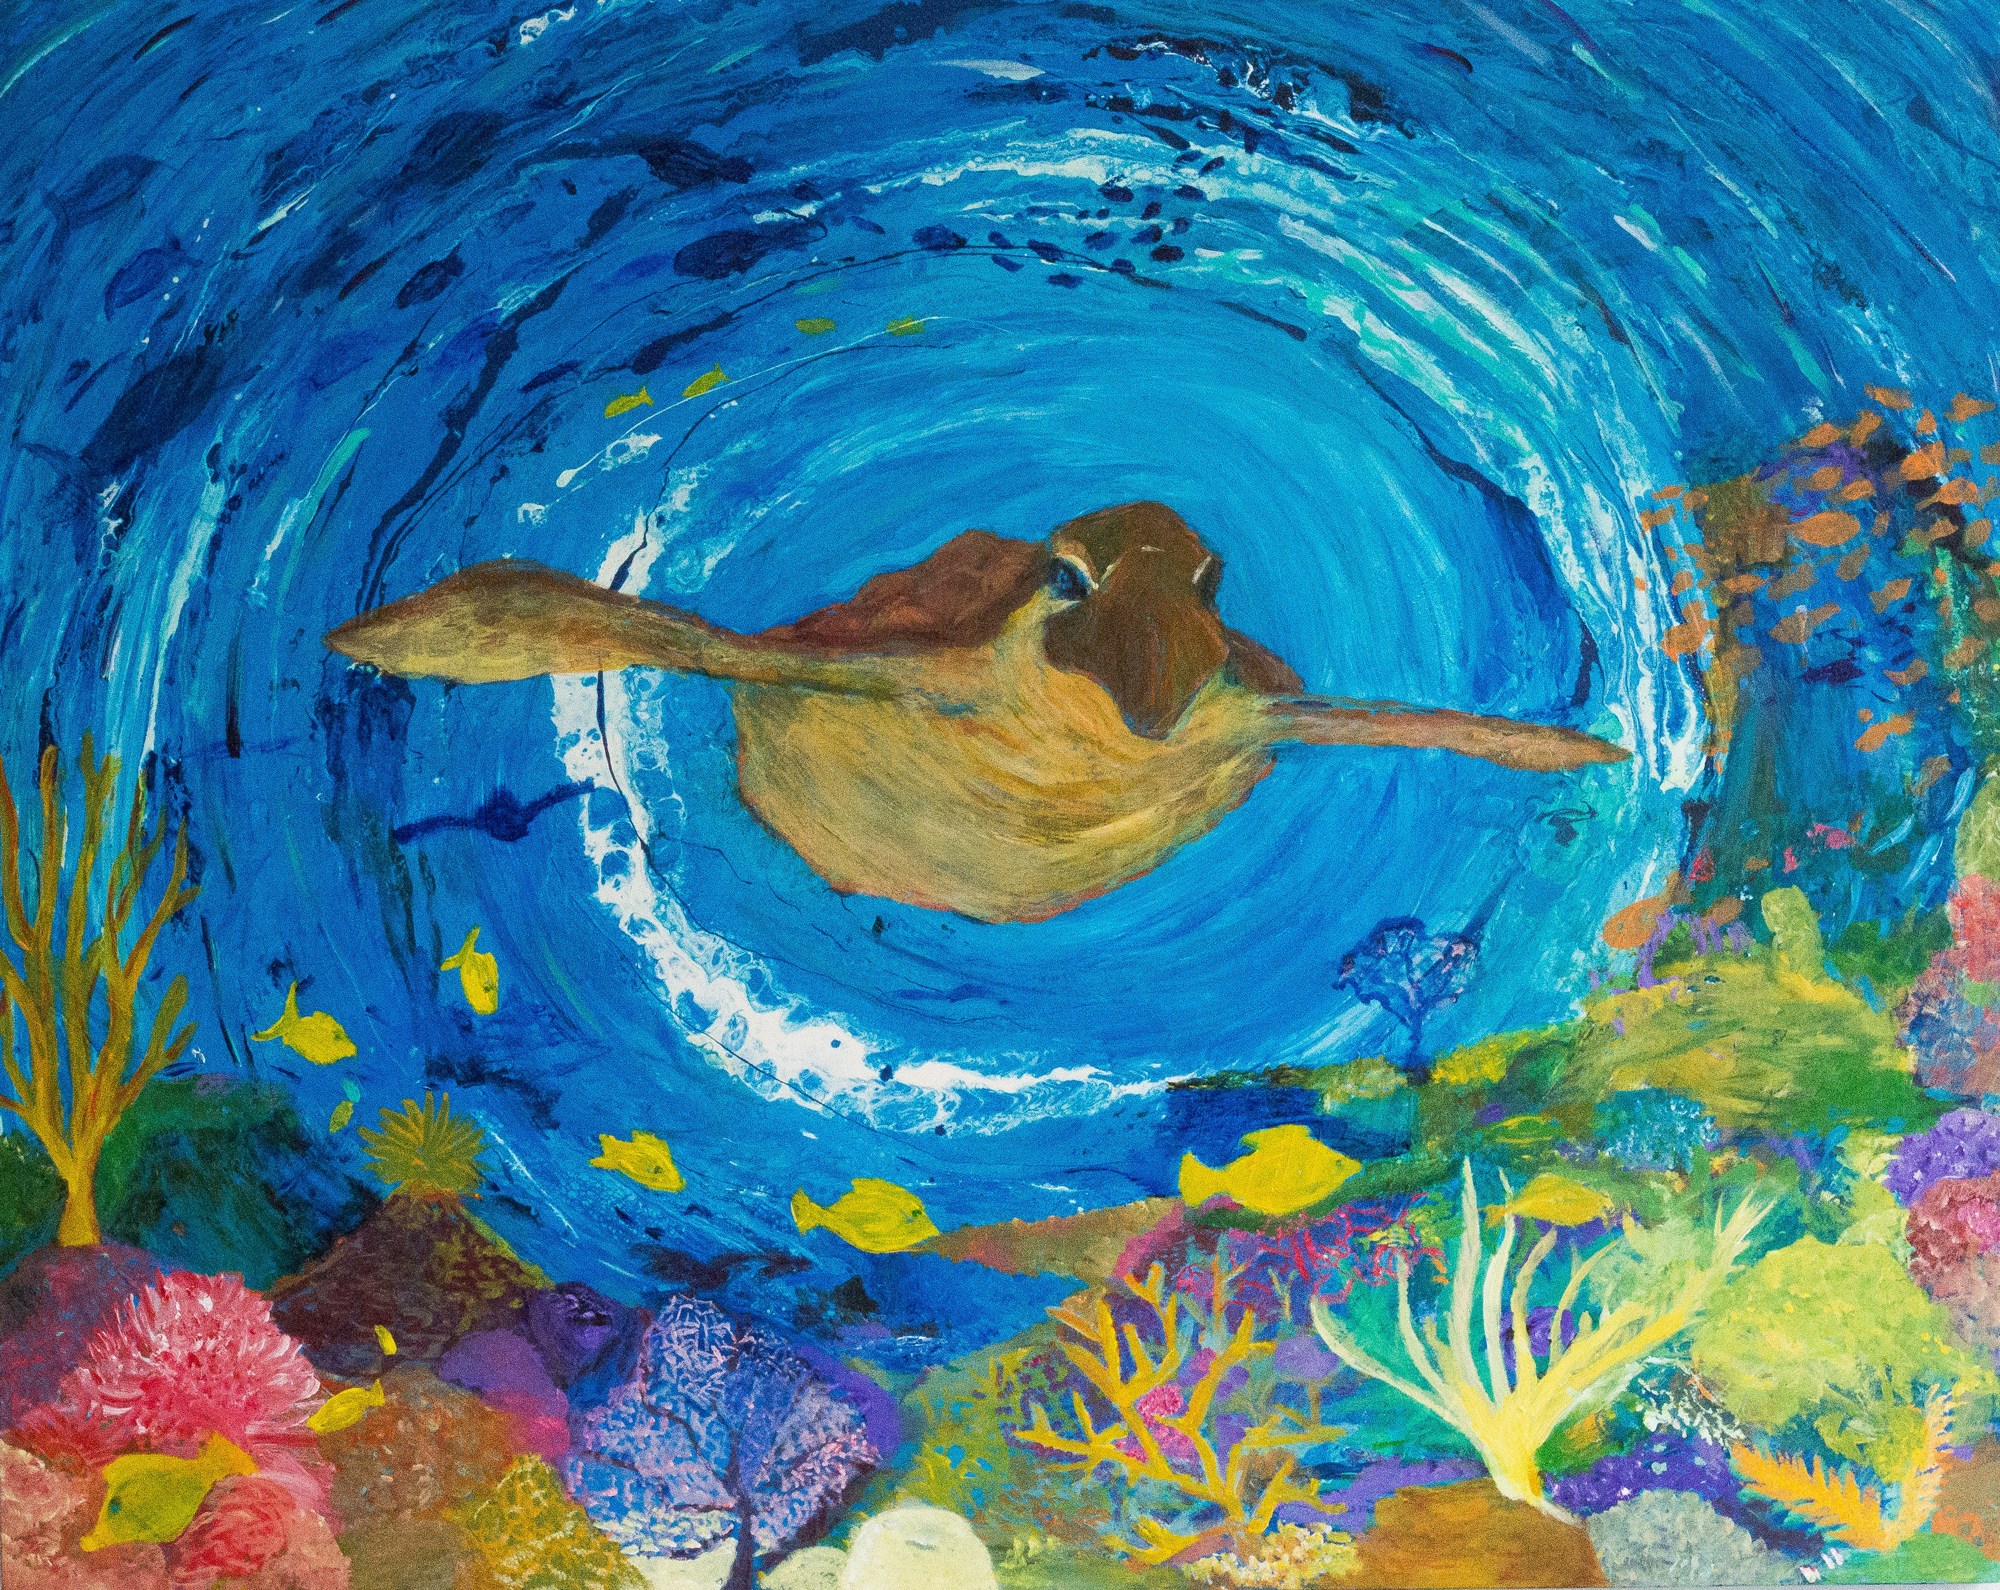 Parris is known for painting ocean scenes and marine life.